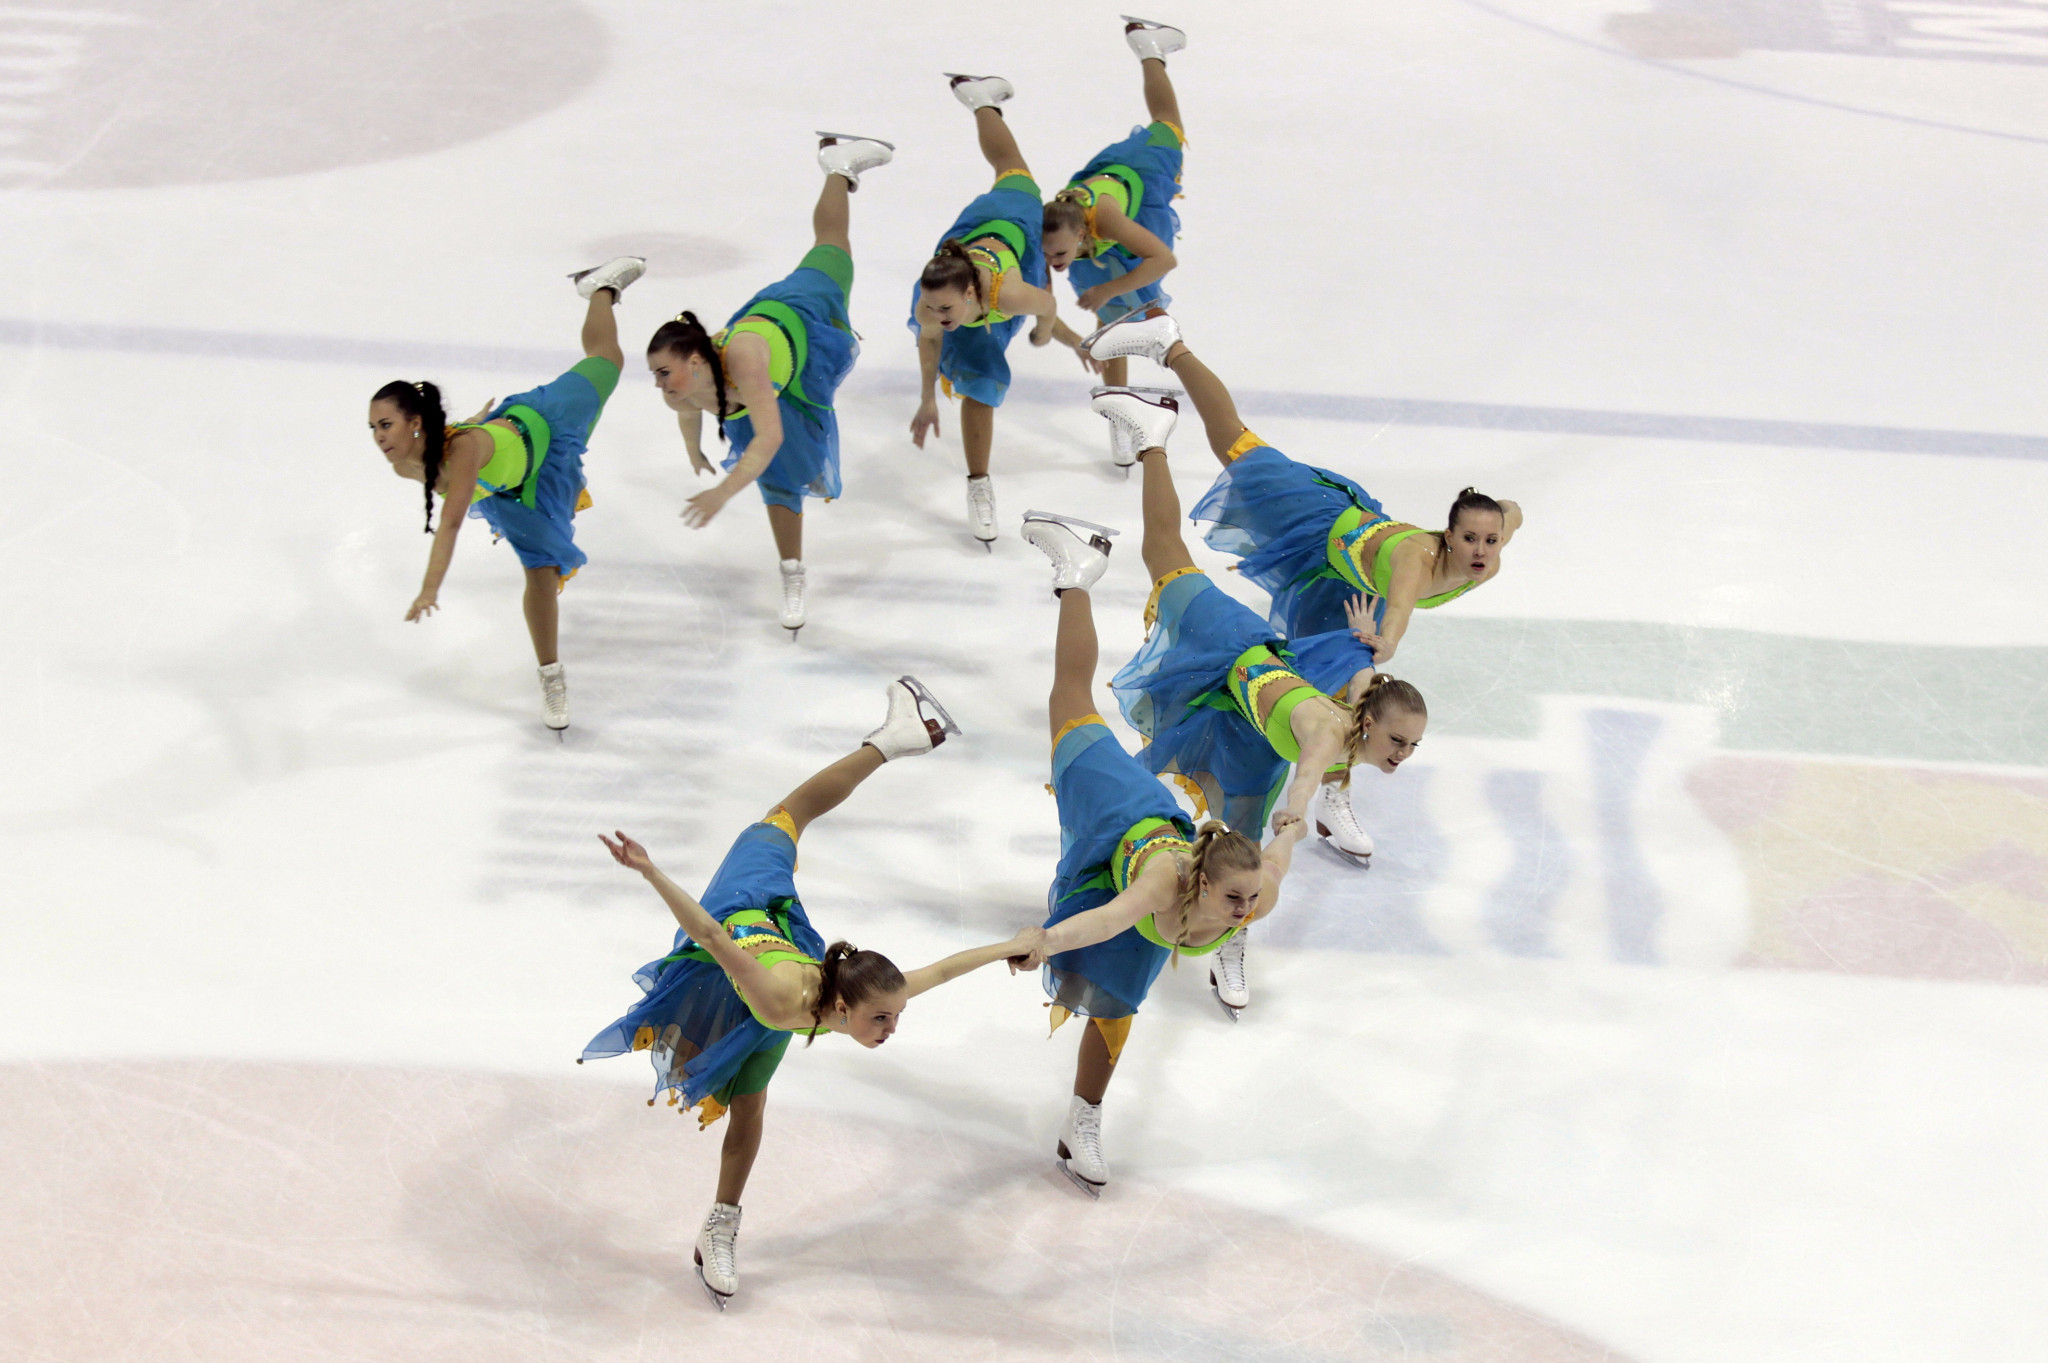 Synchronised figure skating teams from 23 nations will gather in Innsbruck ©Getty Images